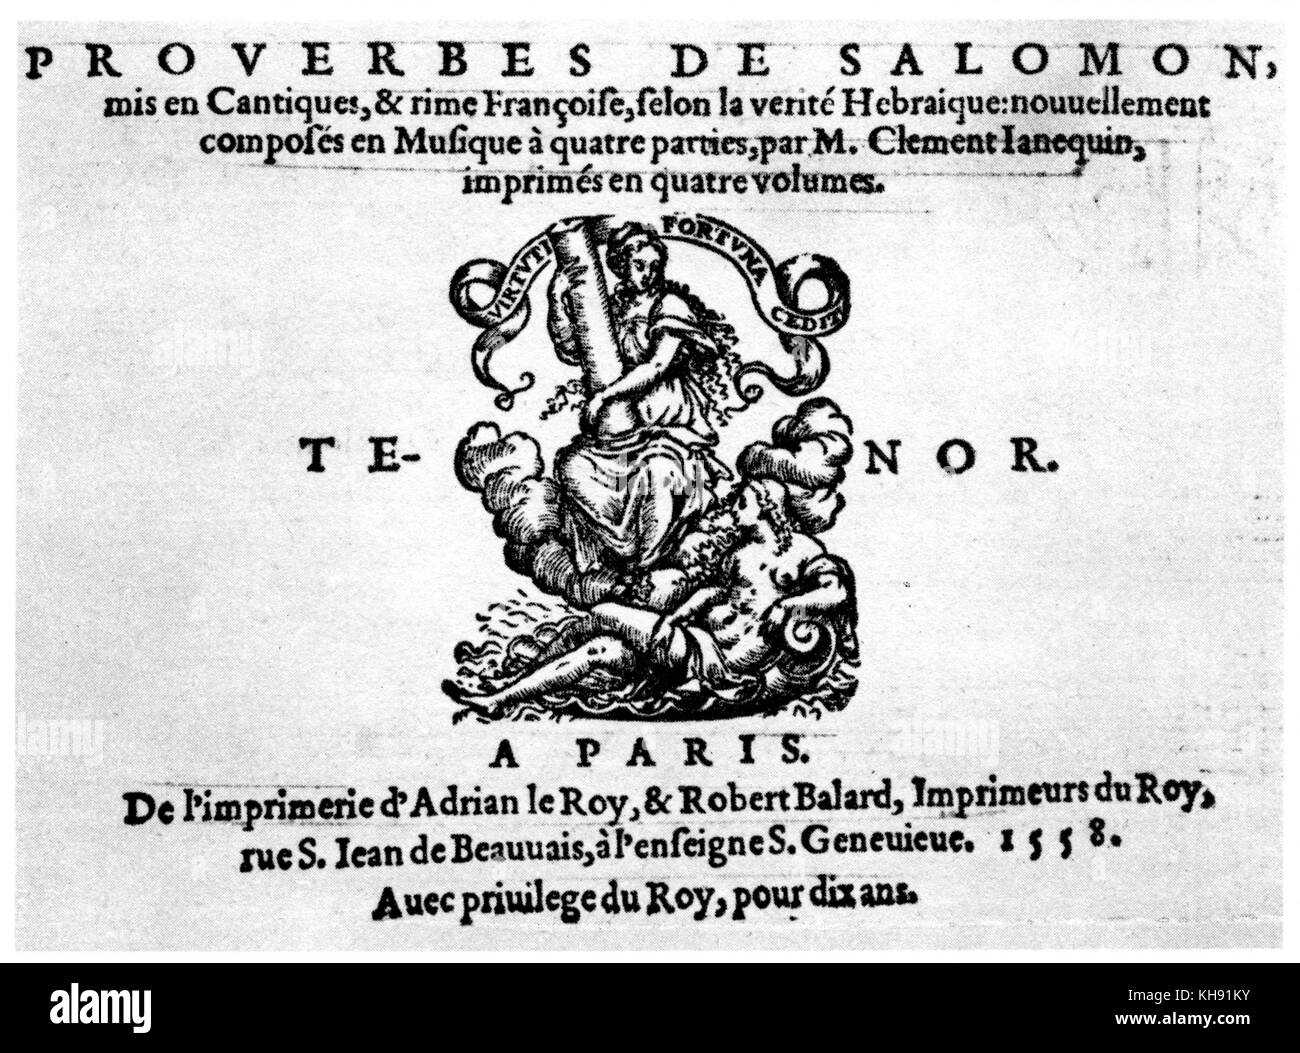 Clement Janequin 's Proverbes de Salomon - title page of score. Song book  of canticles and ryhmes in French after the Hebrew. Published 1558 by  Adrian le Roy and Robert Ballard. CJ: